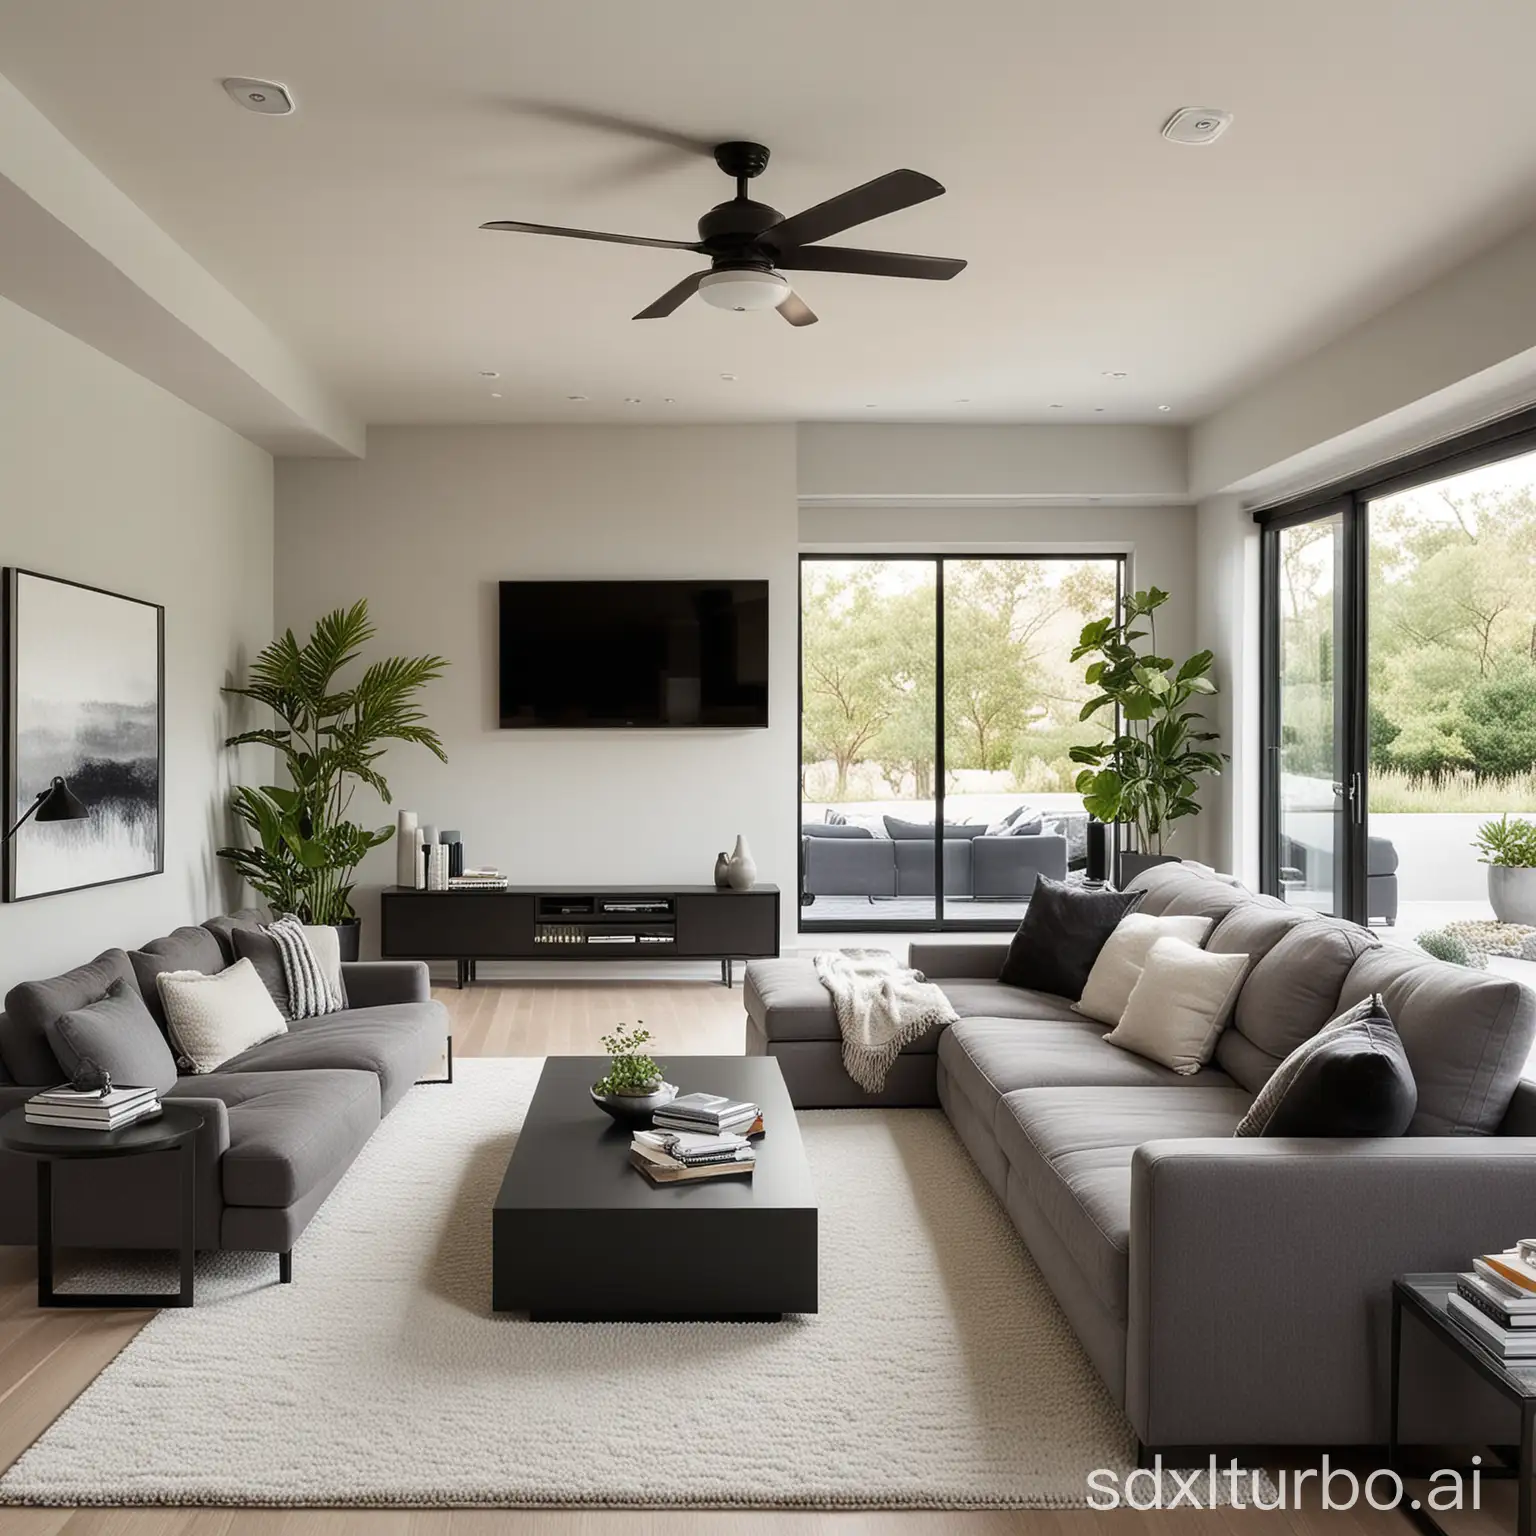 Modern-Gray-Living-Room-with-Comfortable-Furniture-and-Minimalist-Design